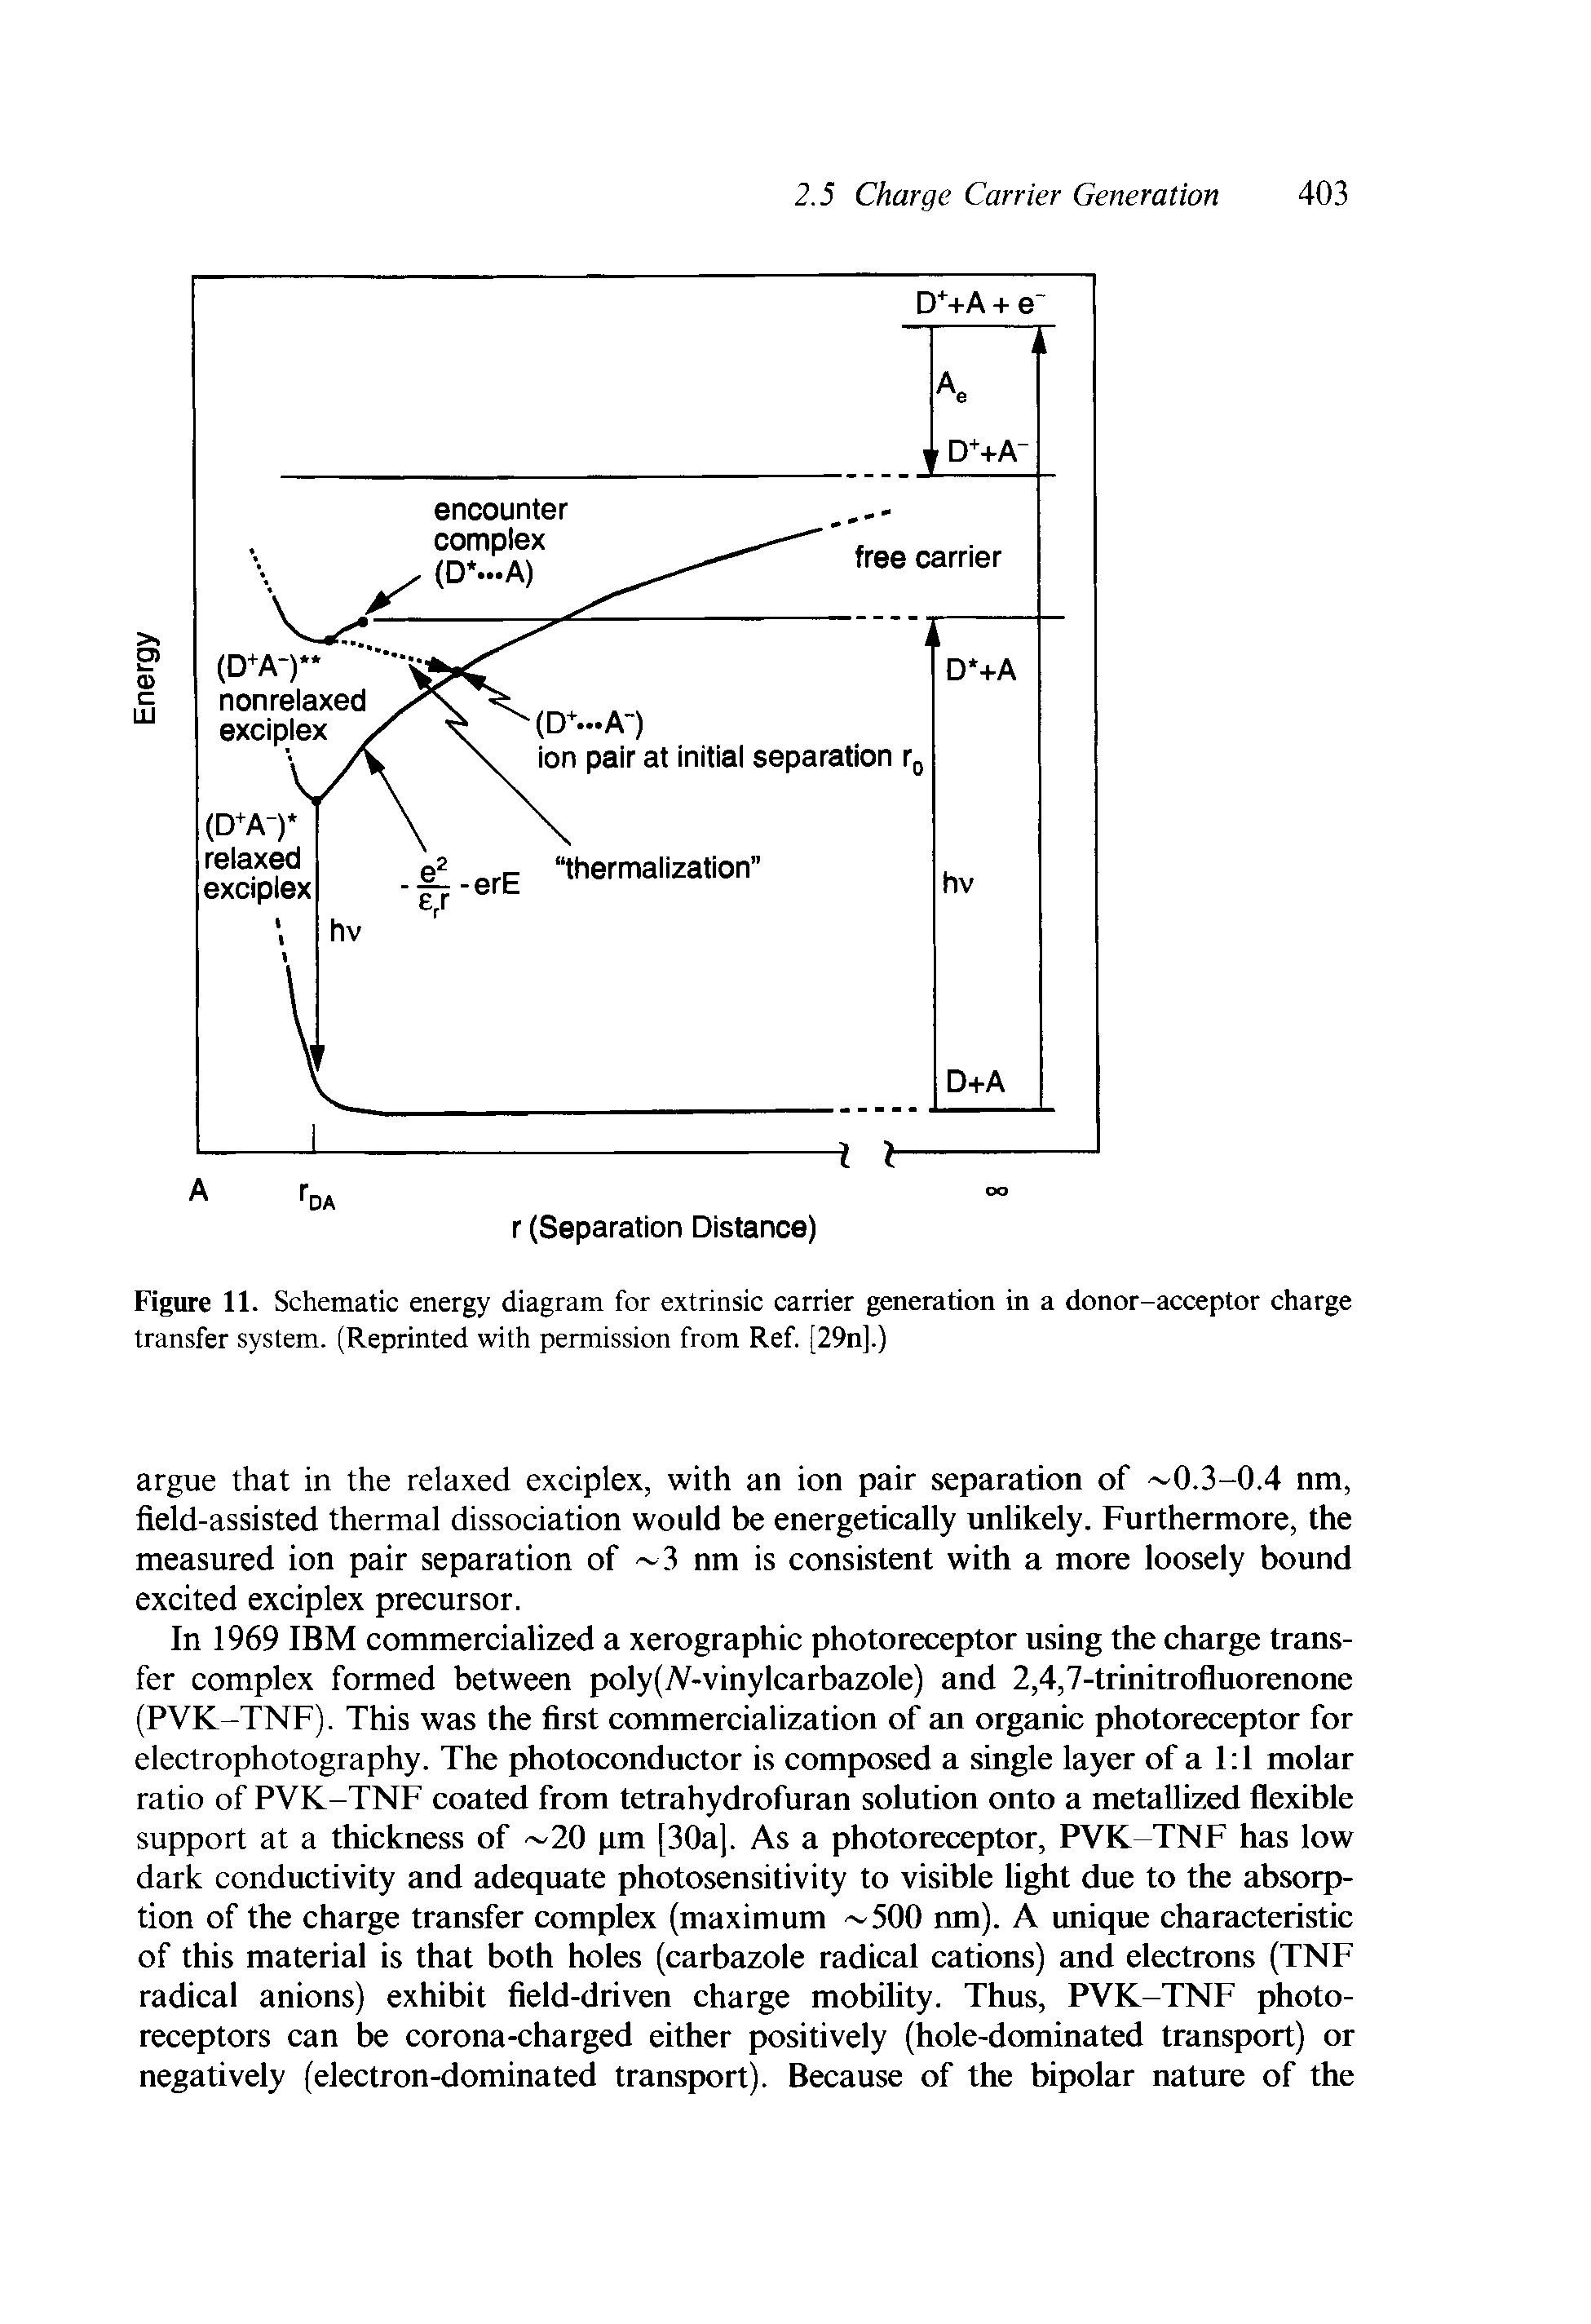 Figure 11. Schematic energy diagram for extrinsic carrier generation in a donor-acceptor charge transfer system. (Reprinted with permission from Ref. [29n].)...